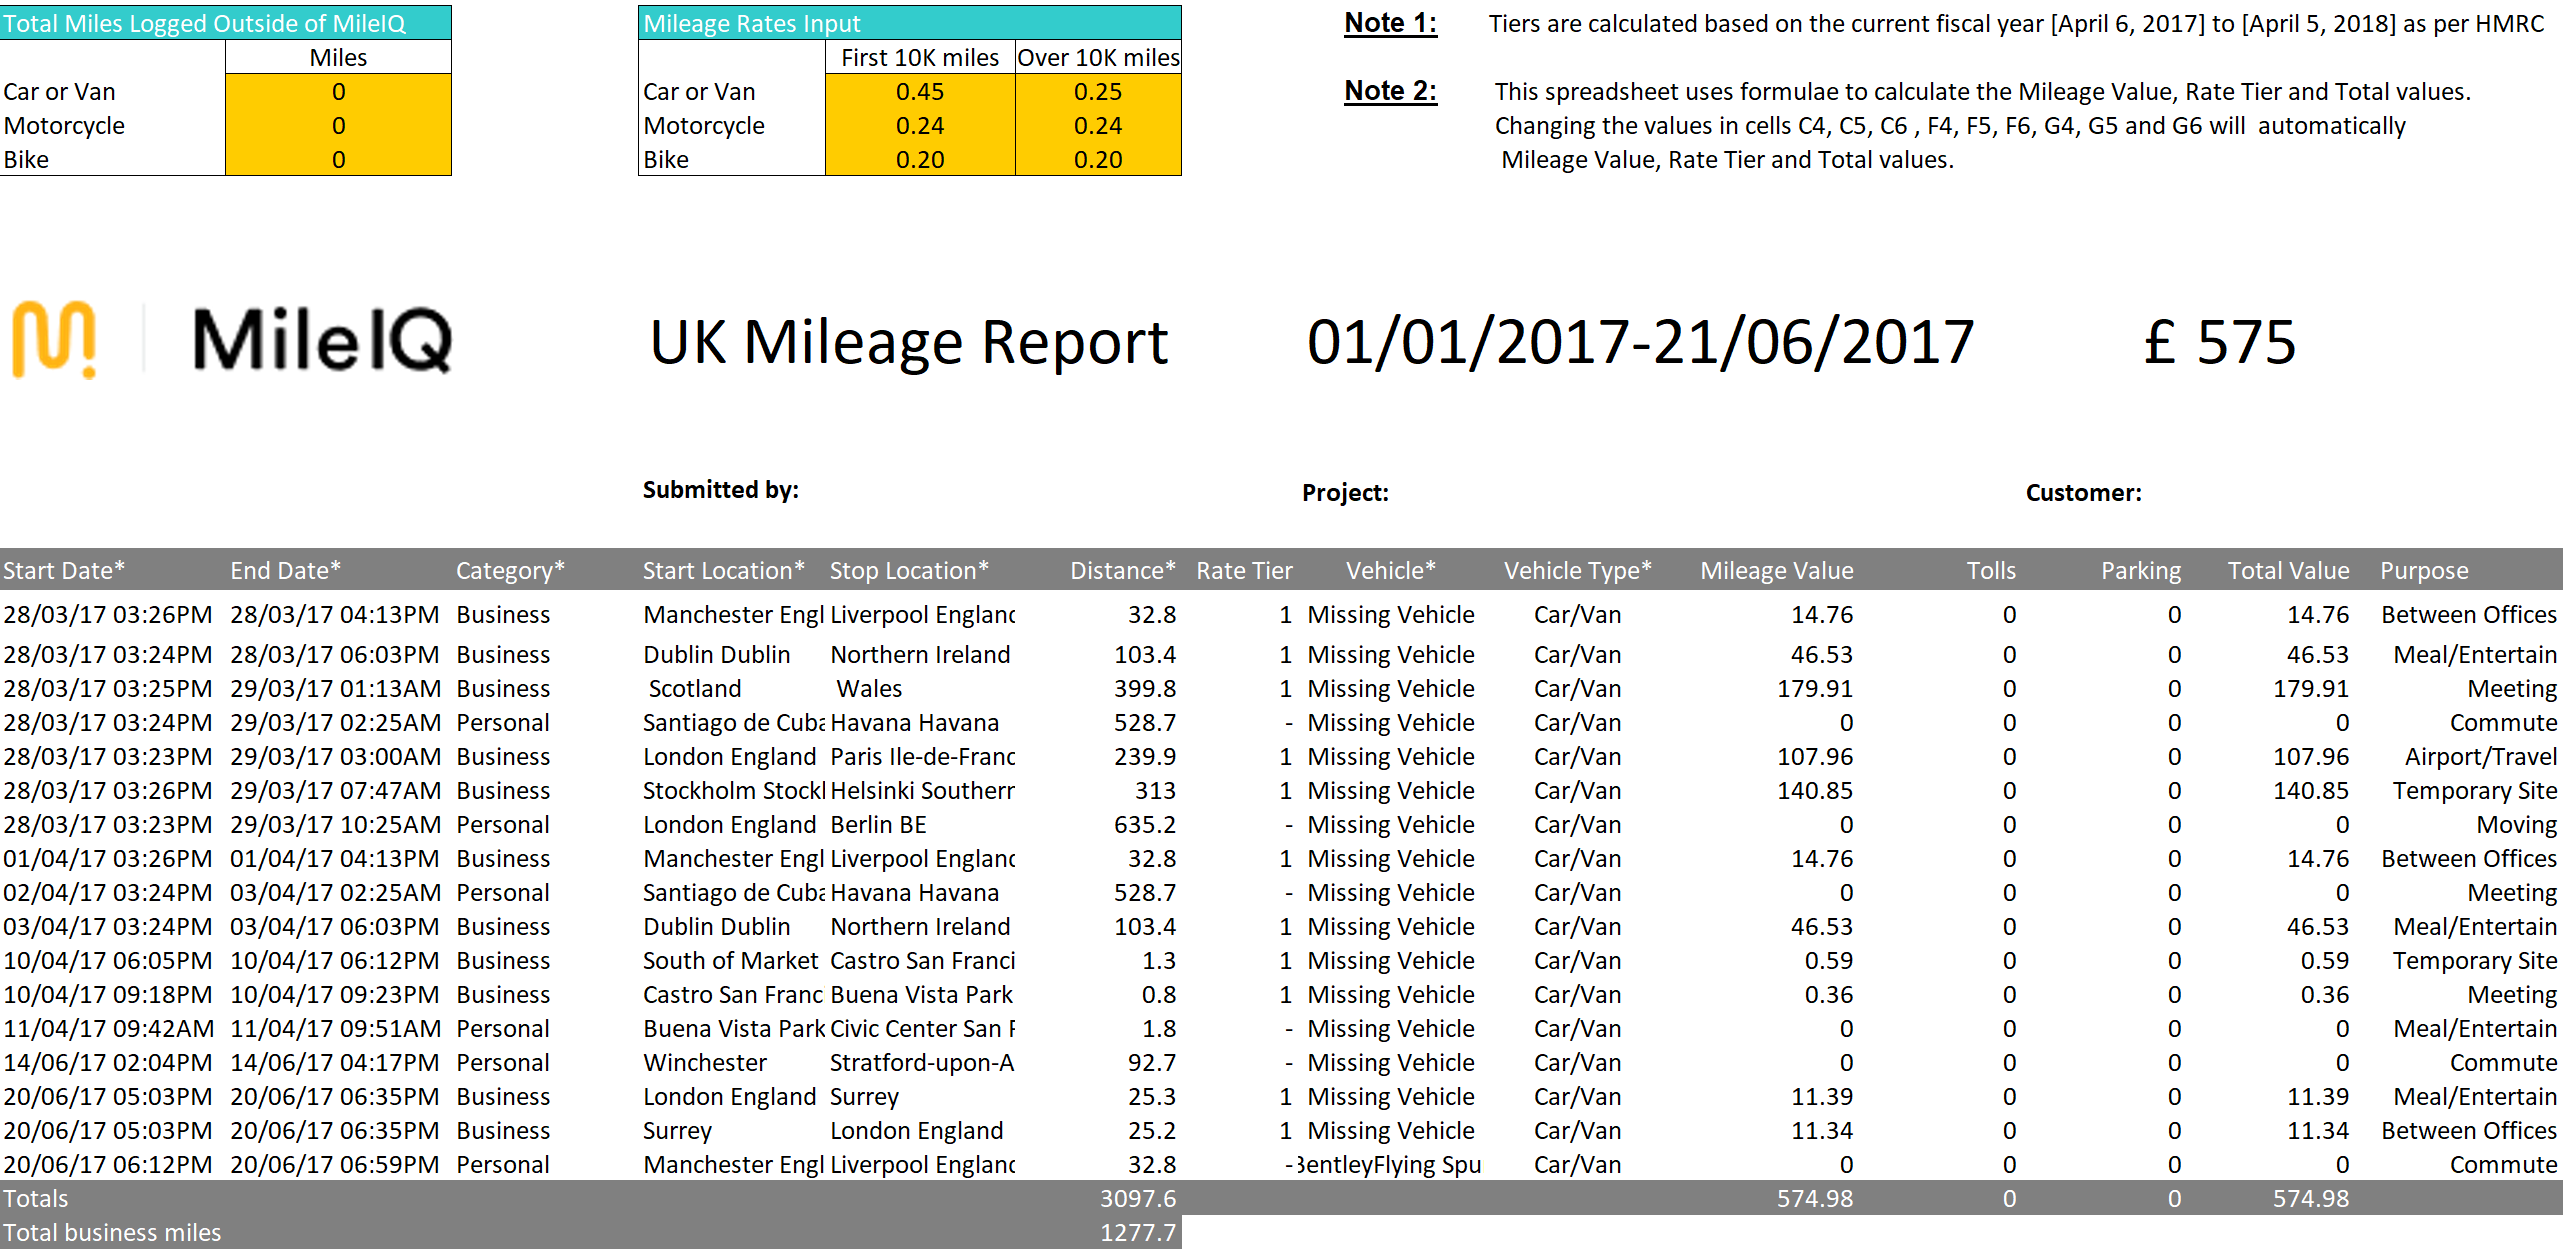 This image shows the XLS report.